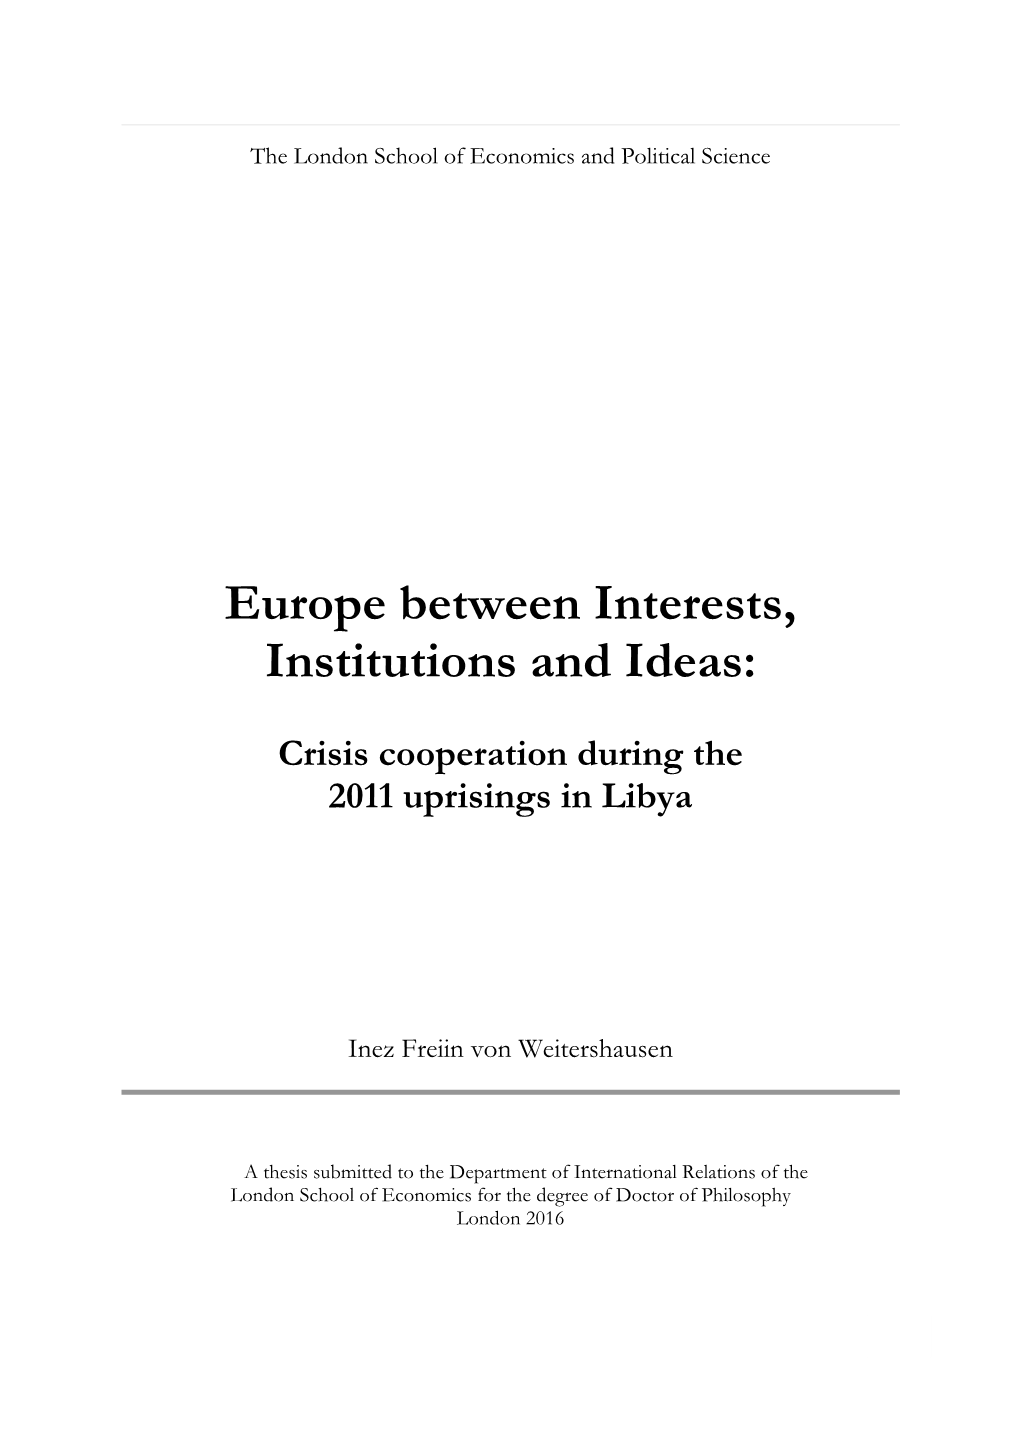 Europe Between Interests, Institutions and Ideas